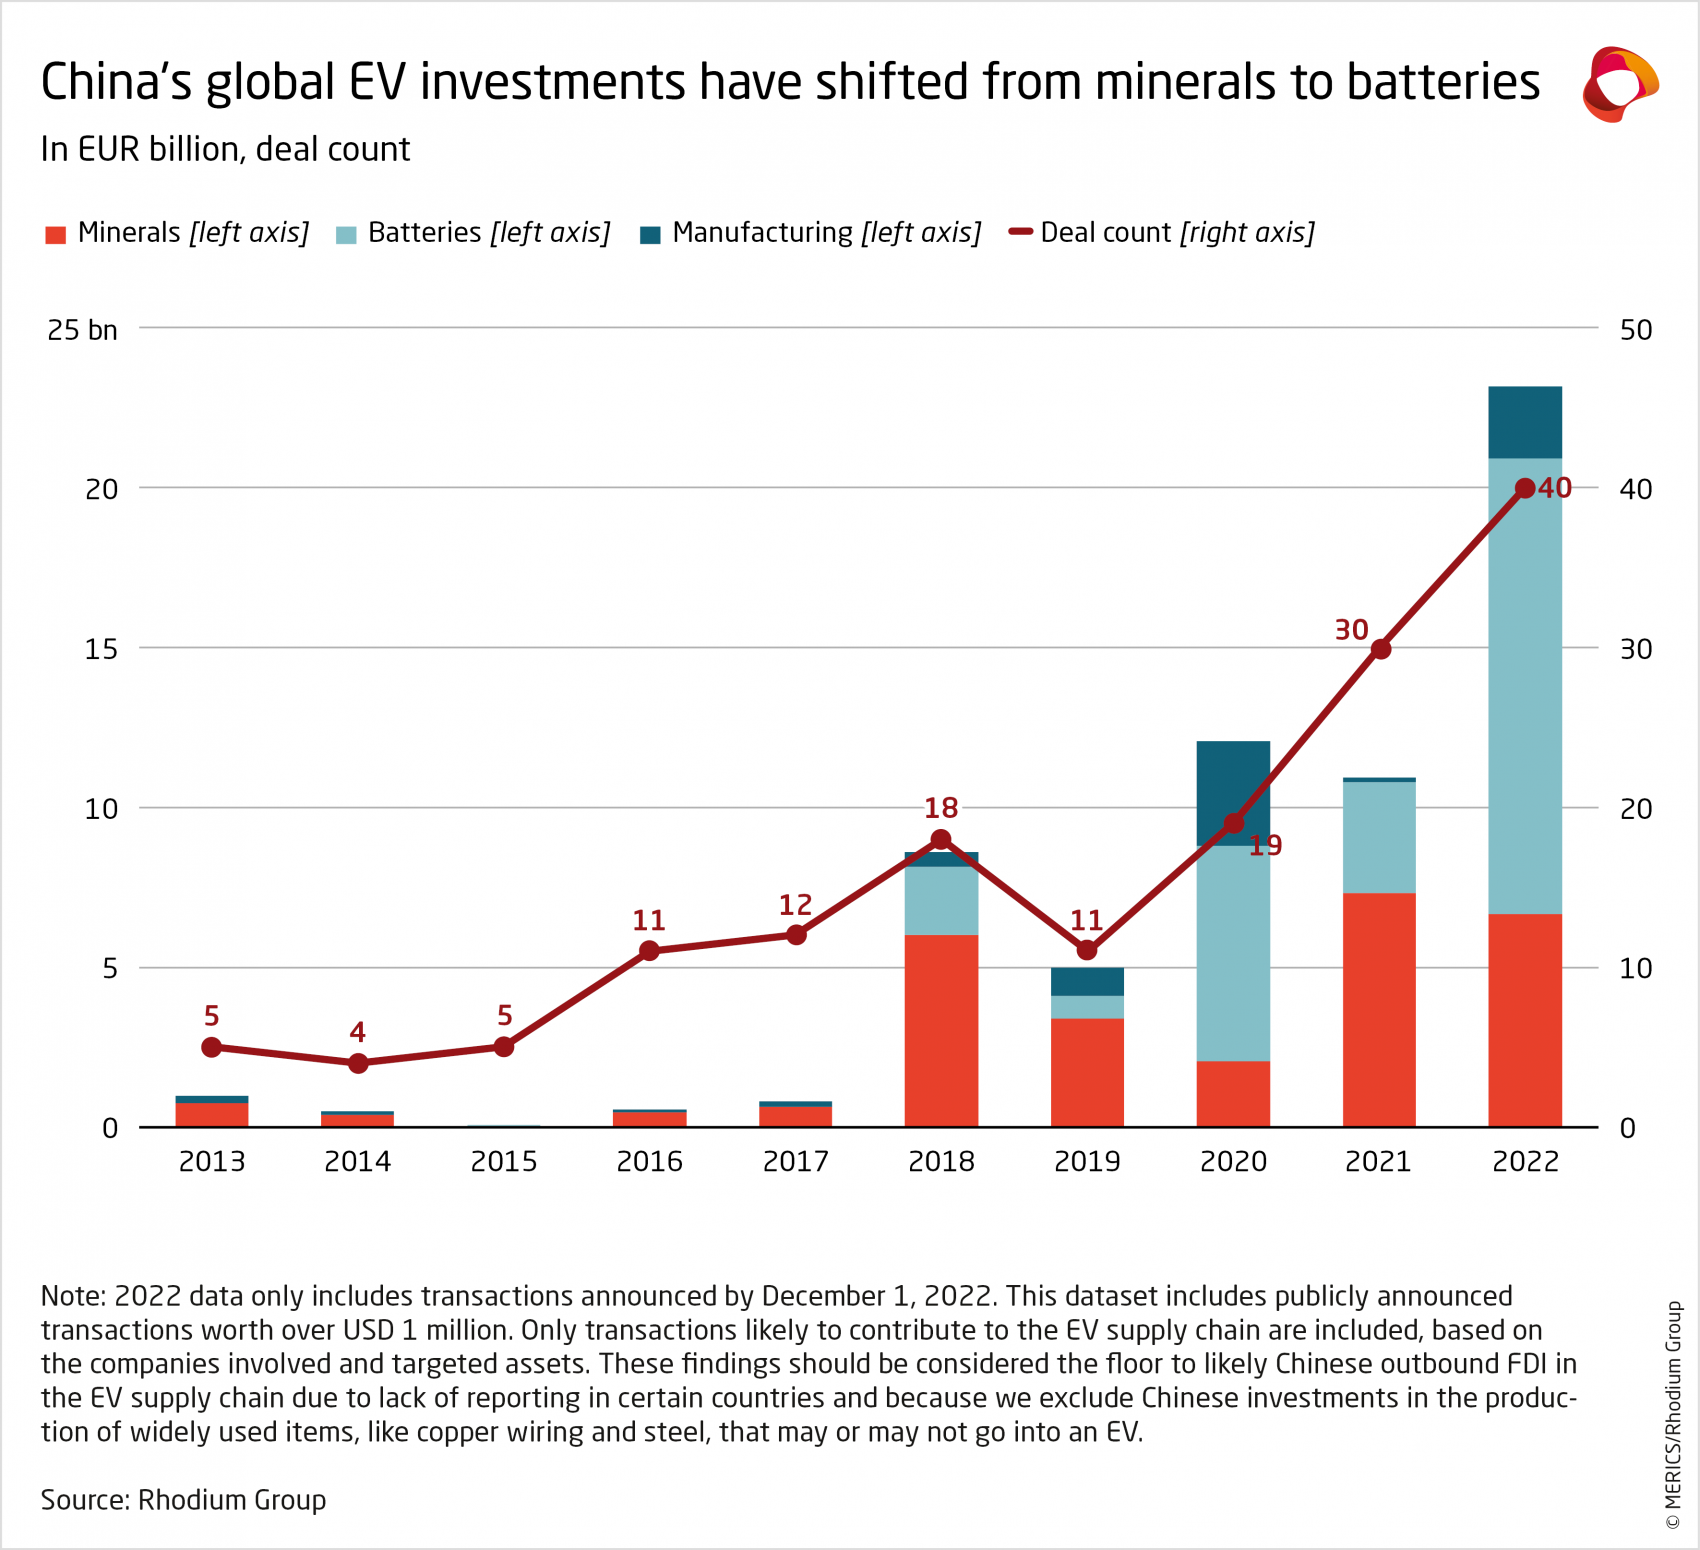 merics-chinese-fdi-in-europe-2022-global-ev-investments-shifted-from-minerals-to-batteries.png